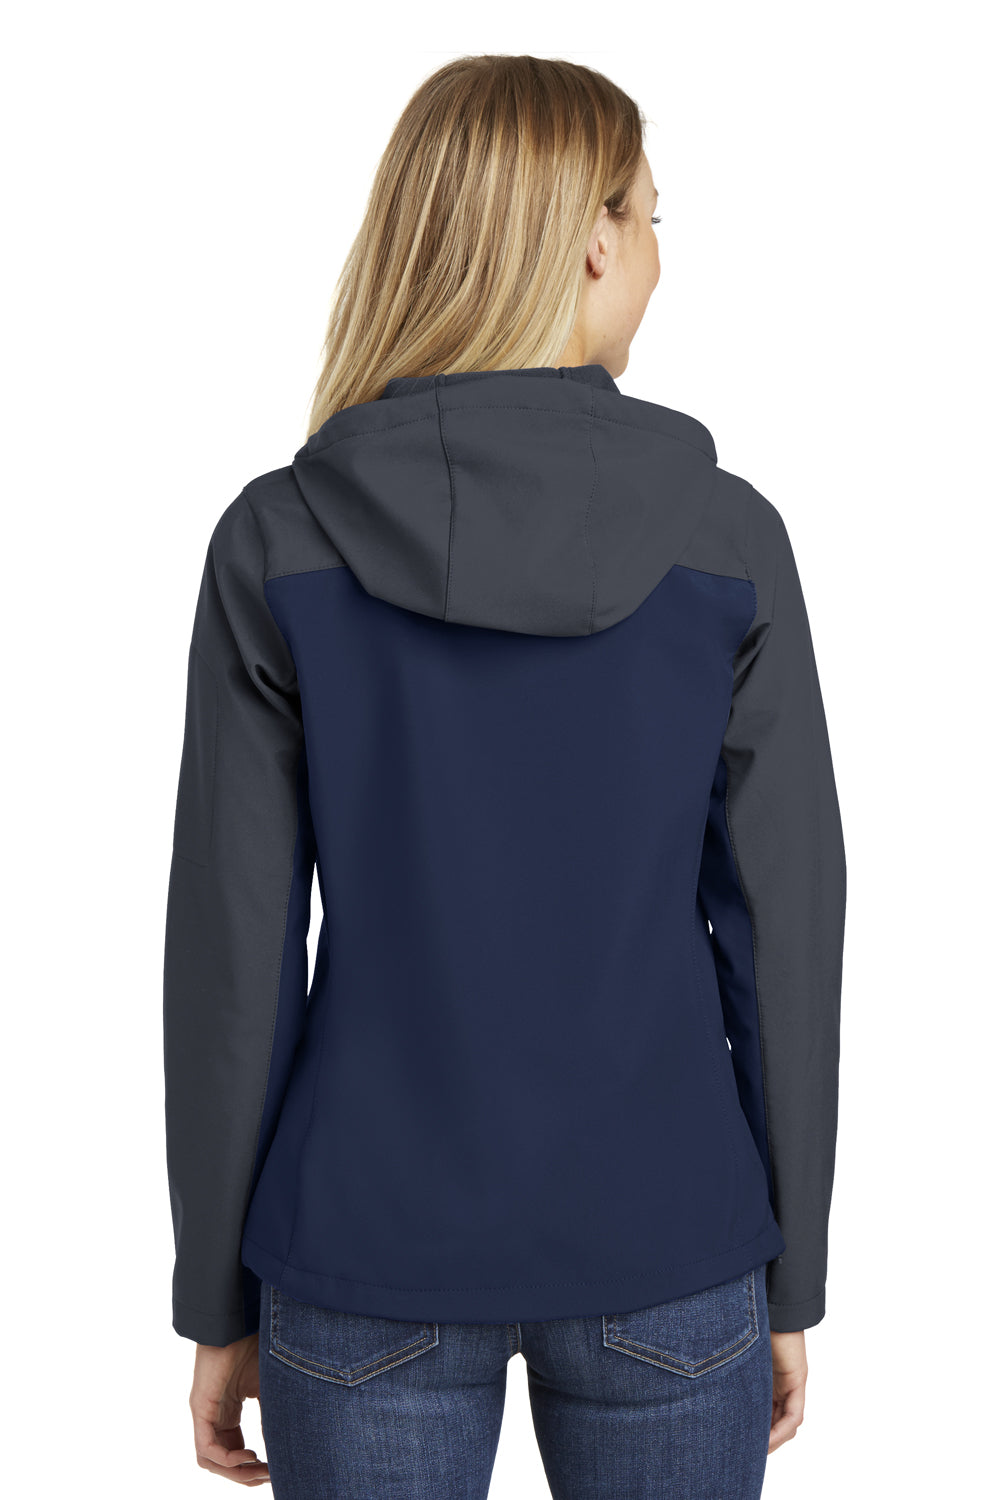 Port Authority L335 Womens Core Wind & Water Resistant Full Zip Hooded Jacket Navy Blue/Grey Back